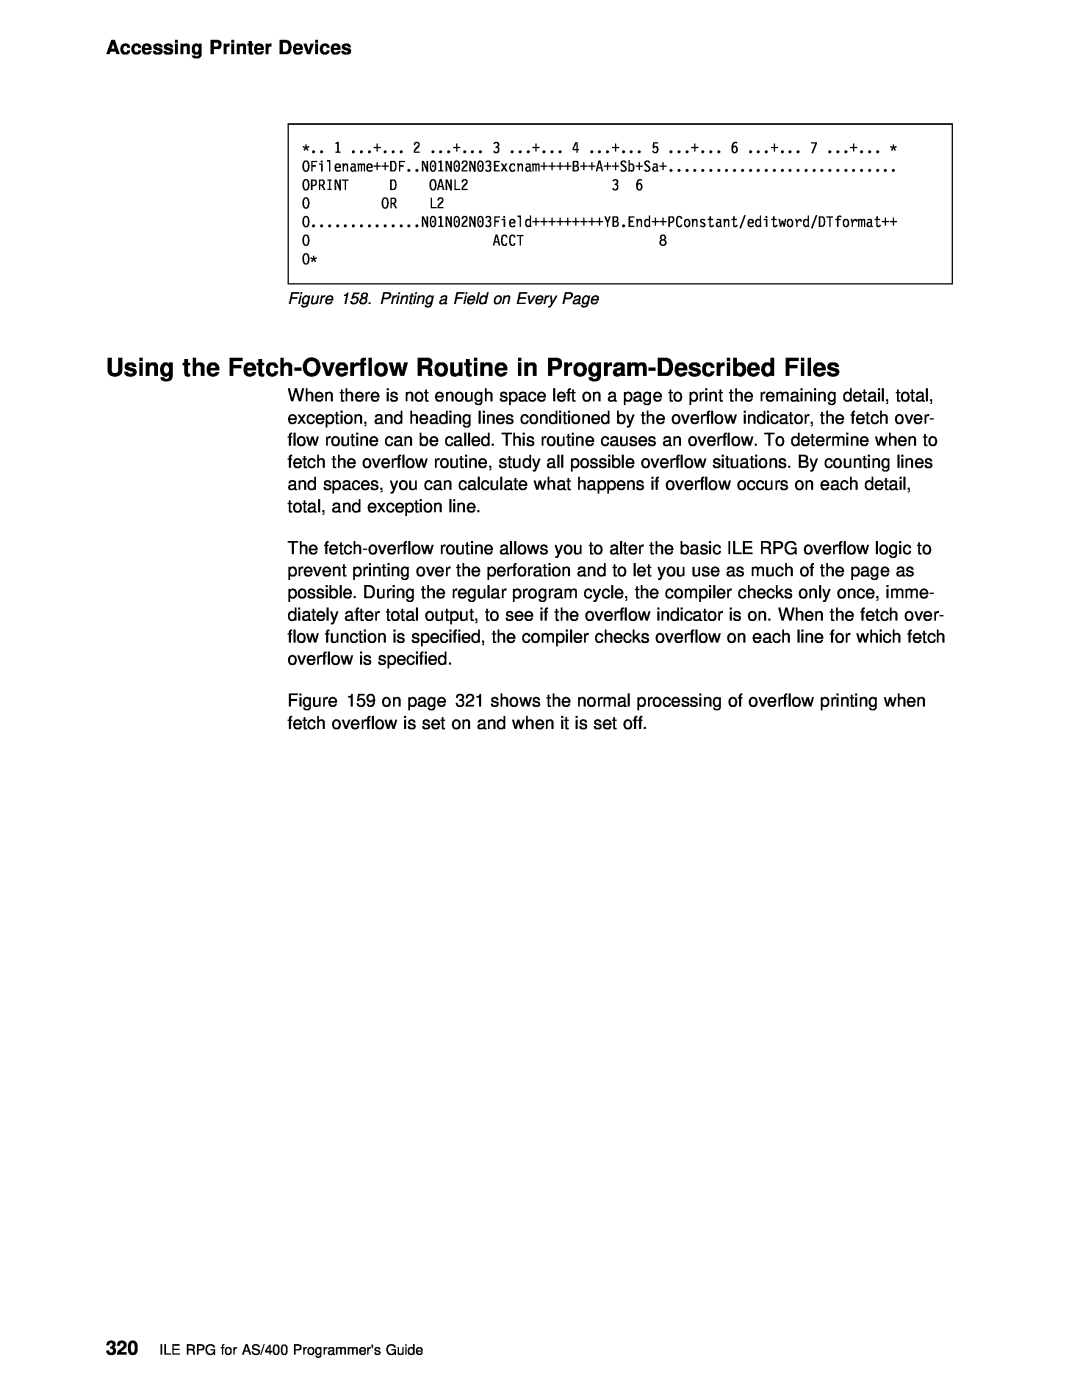 IBM AS/400 manual Using the Fetch-Overflow, Accessing Printer Devices, Printing a Field on Every Page 